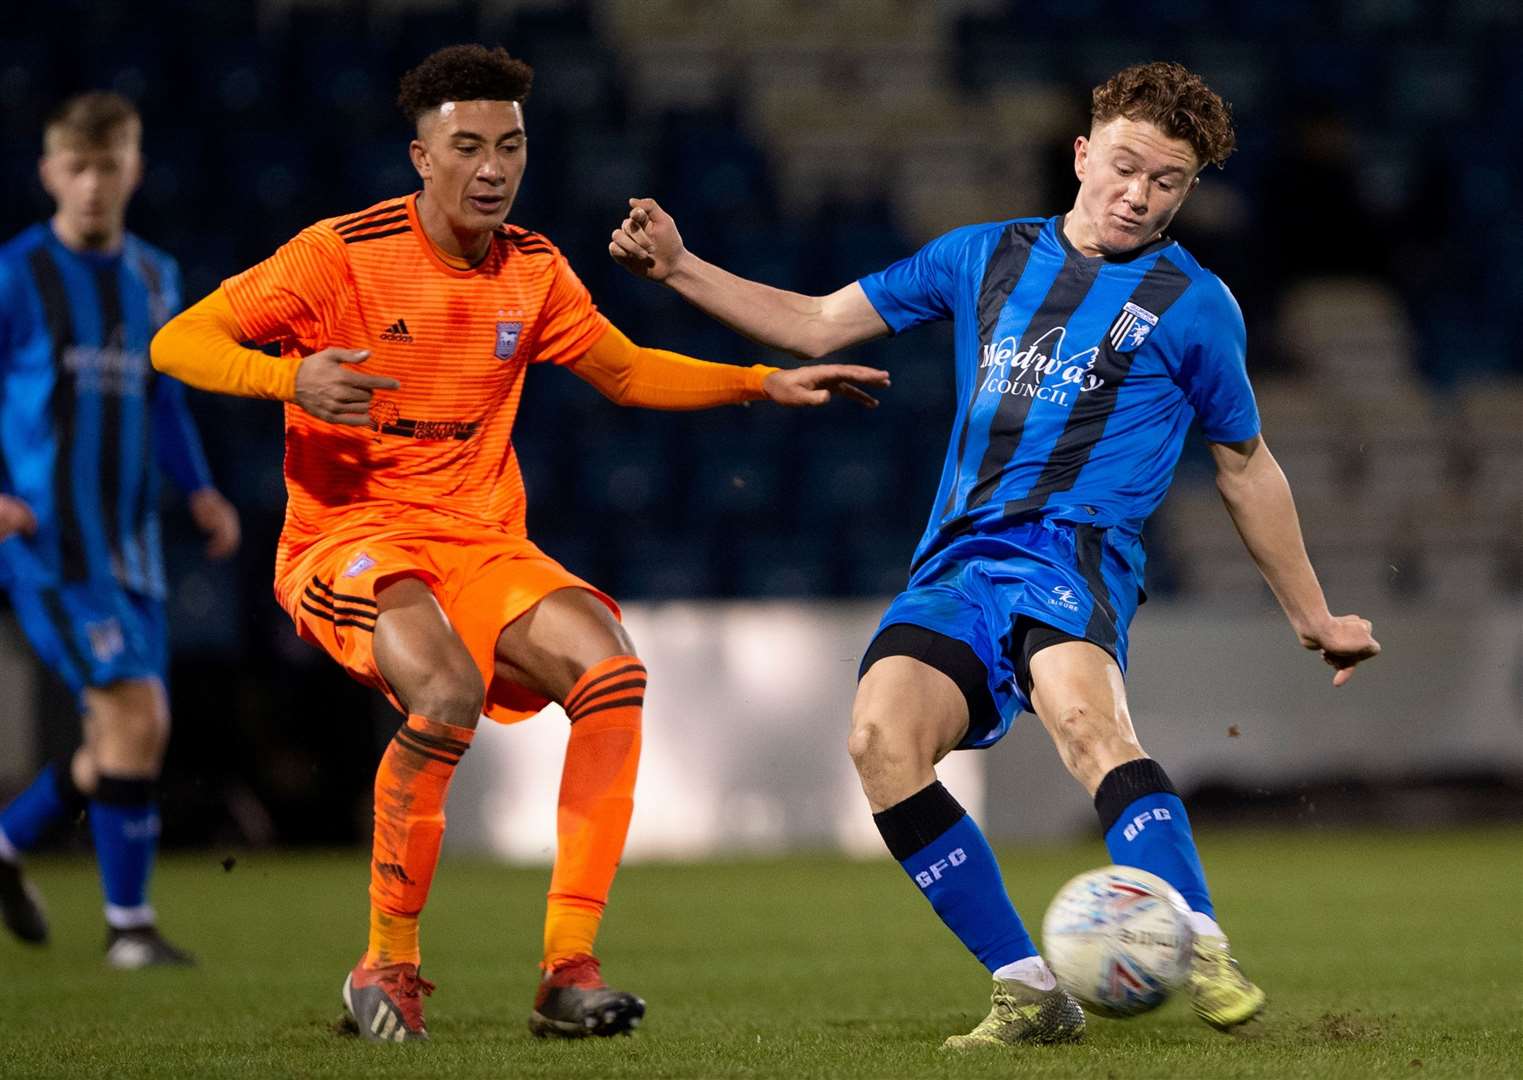 Jude Arthurs in FA Youth Cup action for Gillingham against Ipswich Town in January 2019